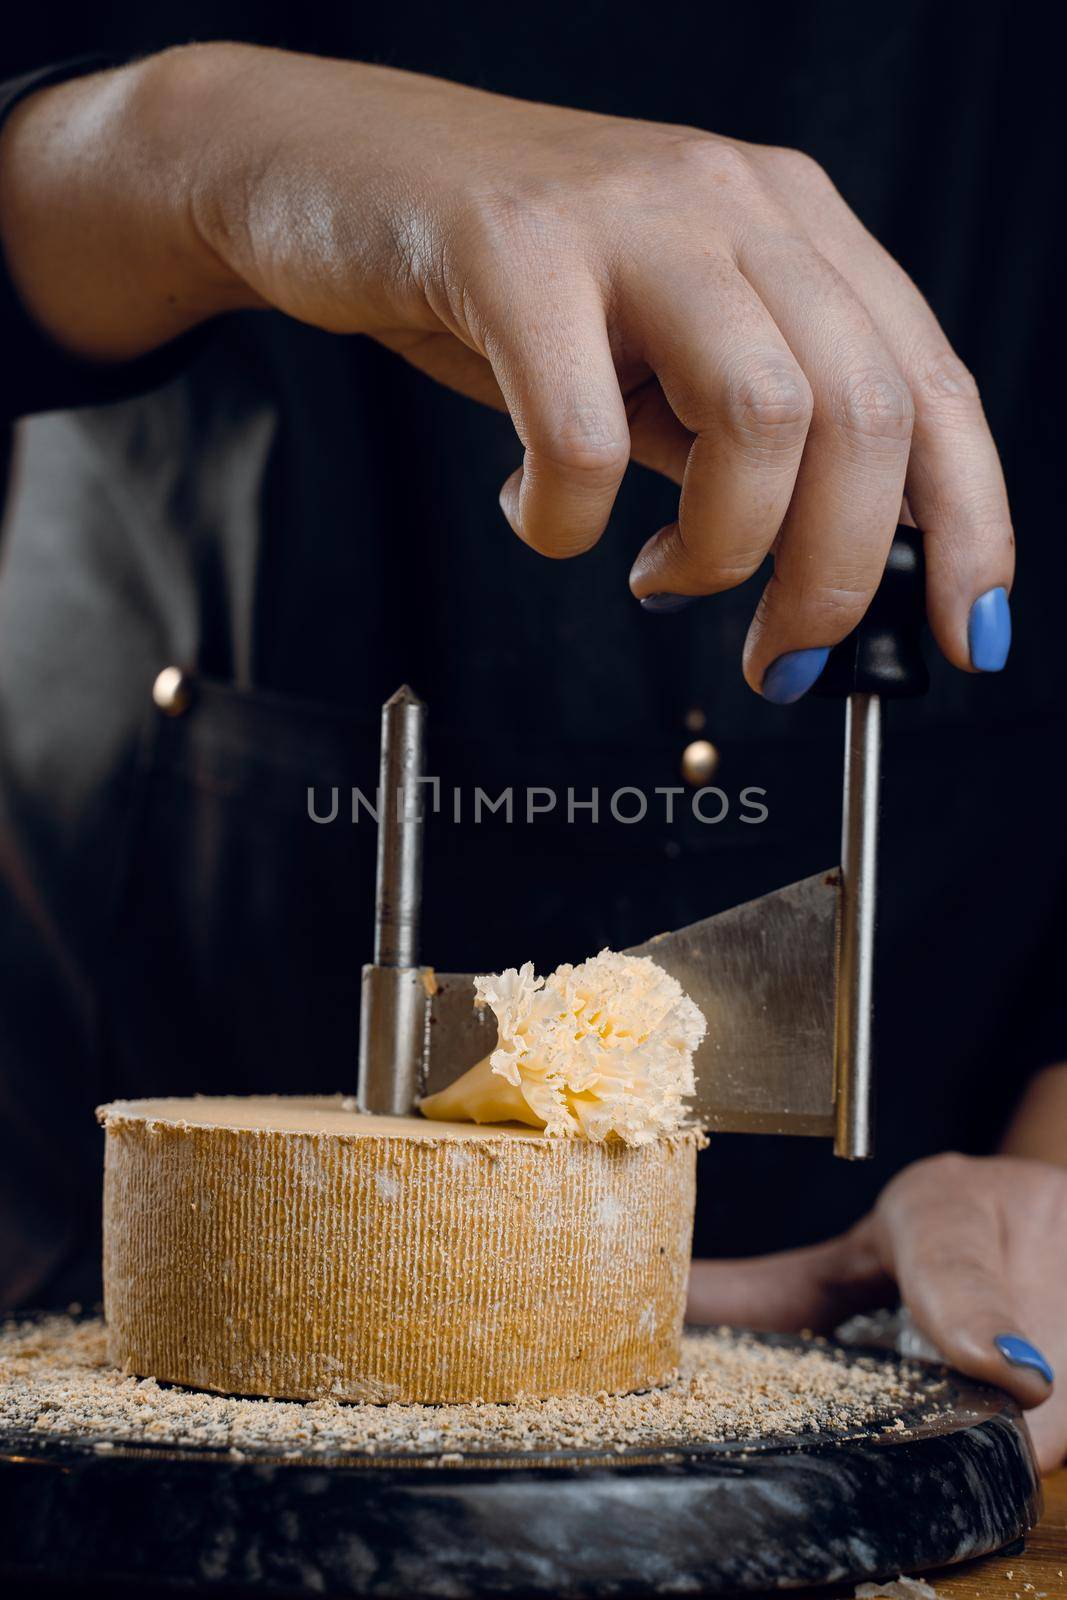 Shaving tete de moine cheese using girolle knife. Monks head. Variety of Swiss semi-hard cheese made from cows milk by Rabizo